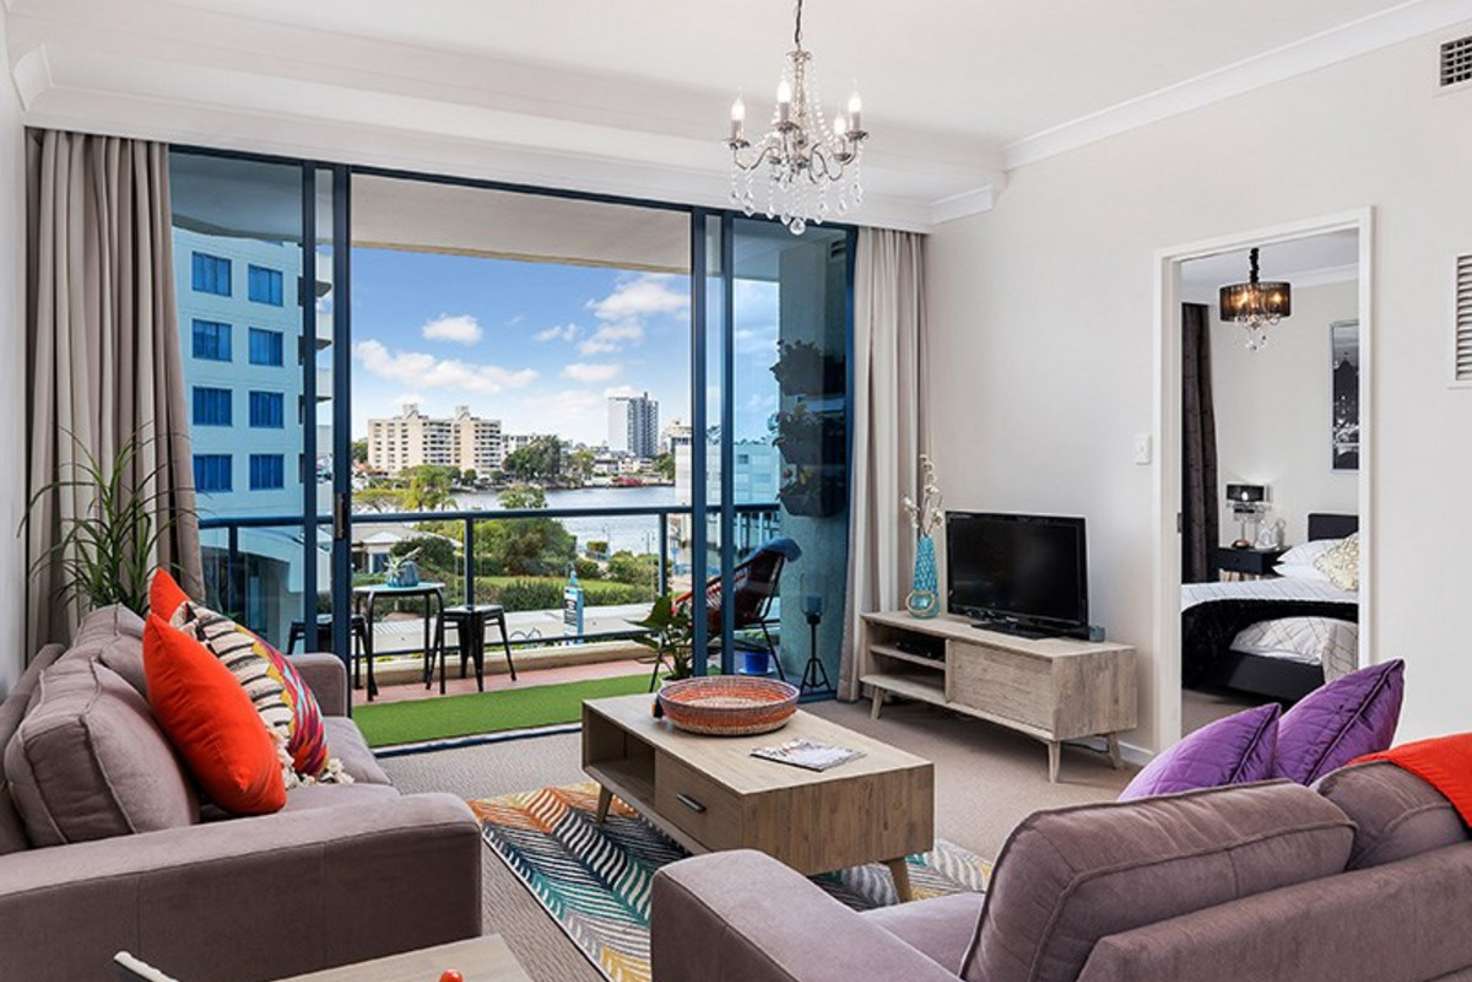 Main view of Homely apartment listing, 35 Prospect Street, Kangaroo Point QLD 4169